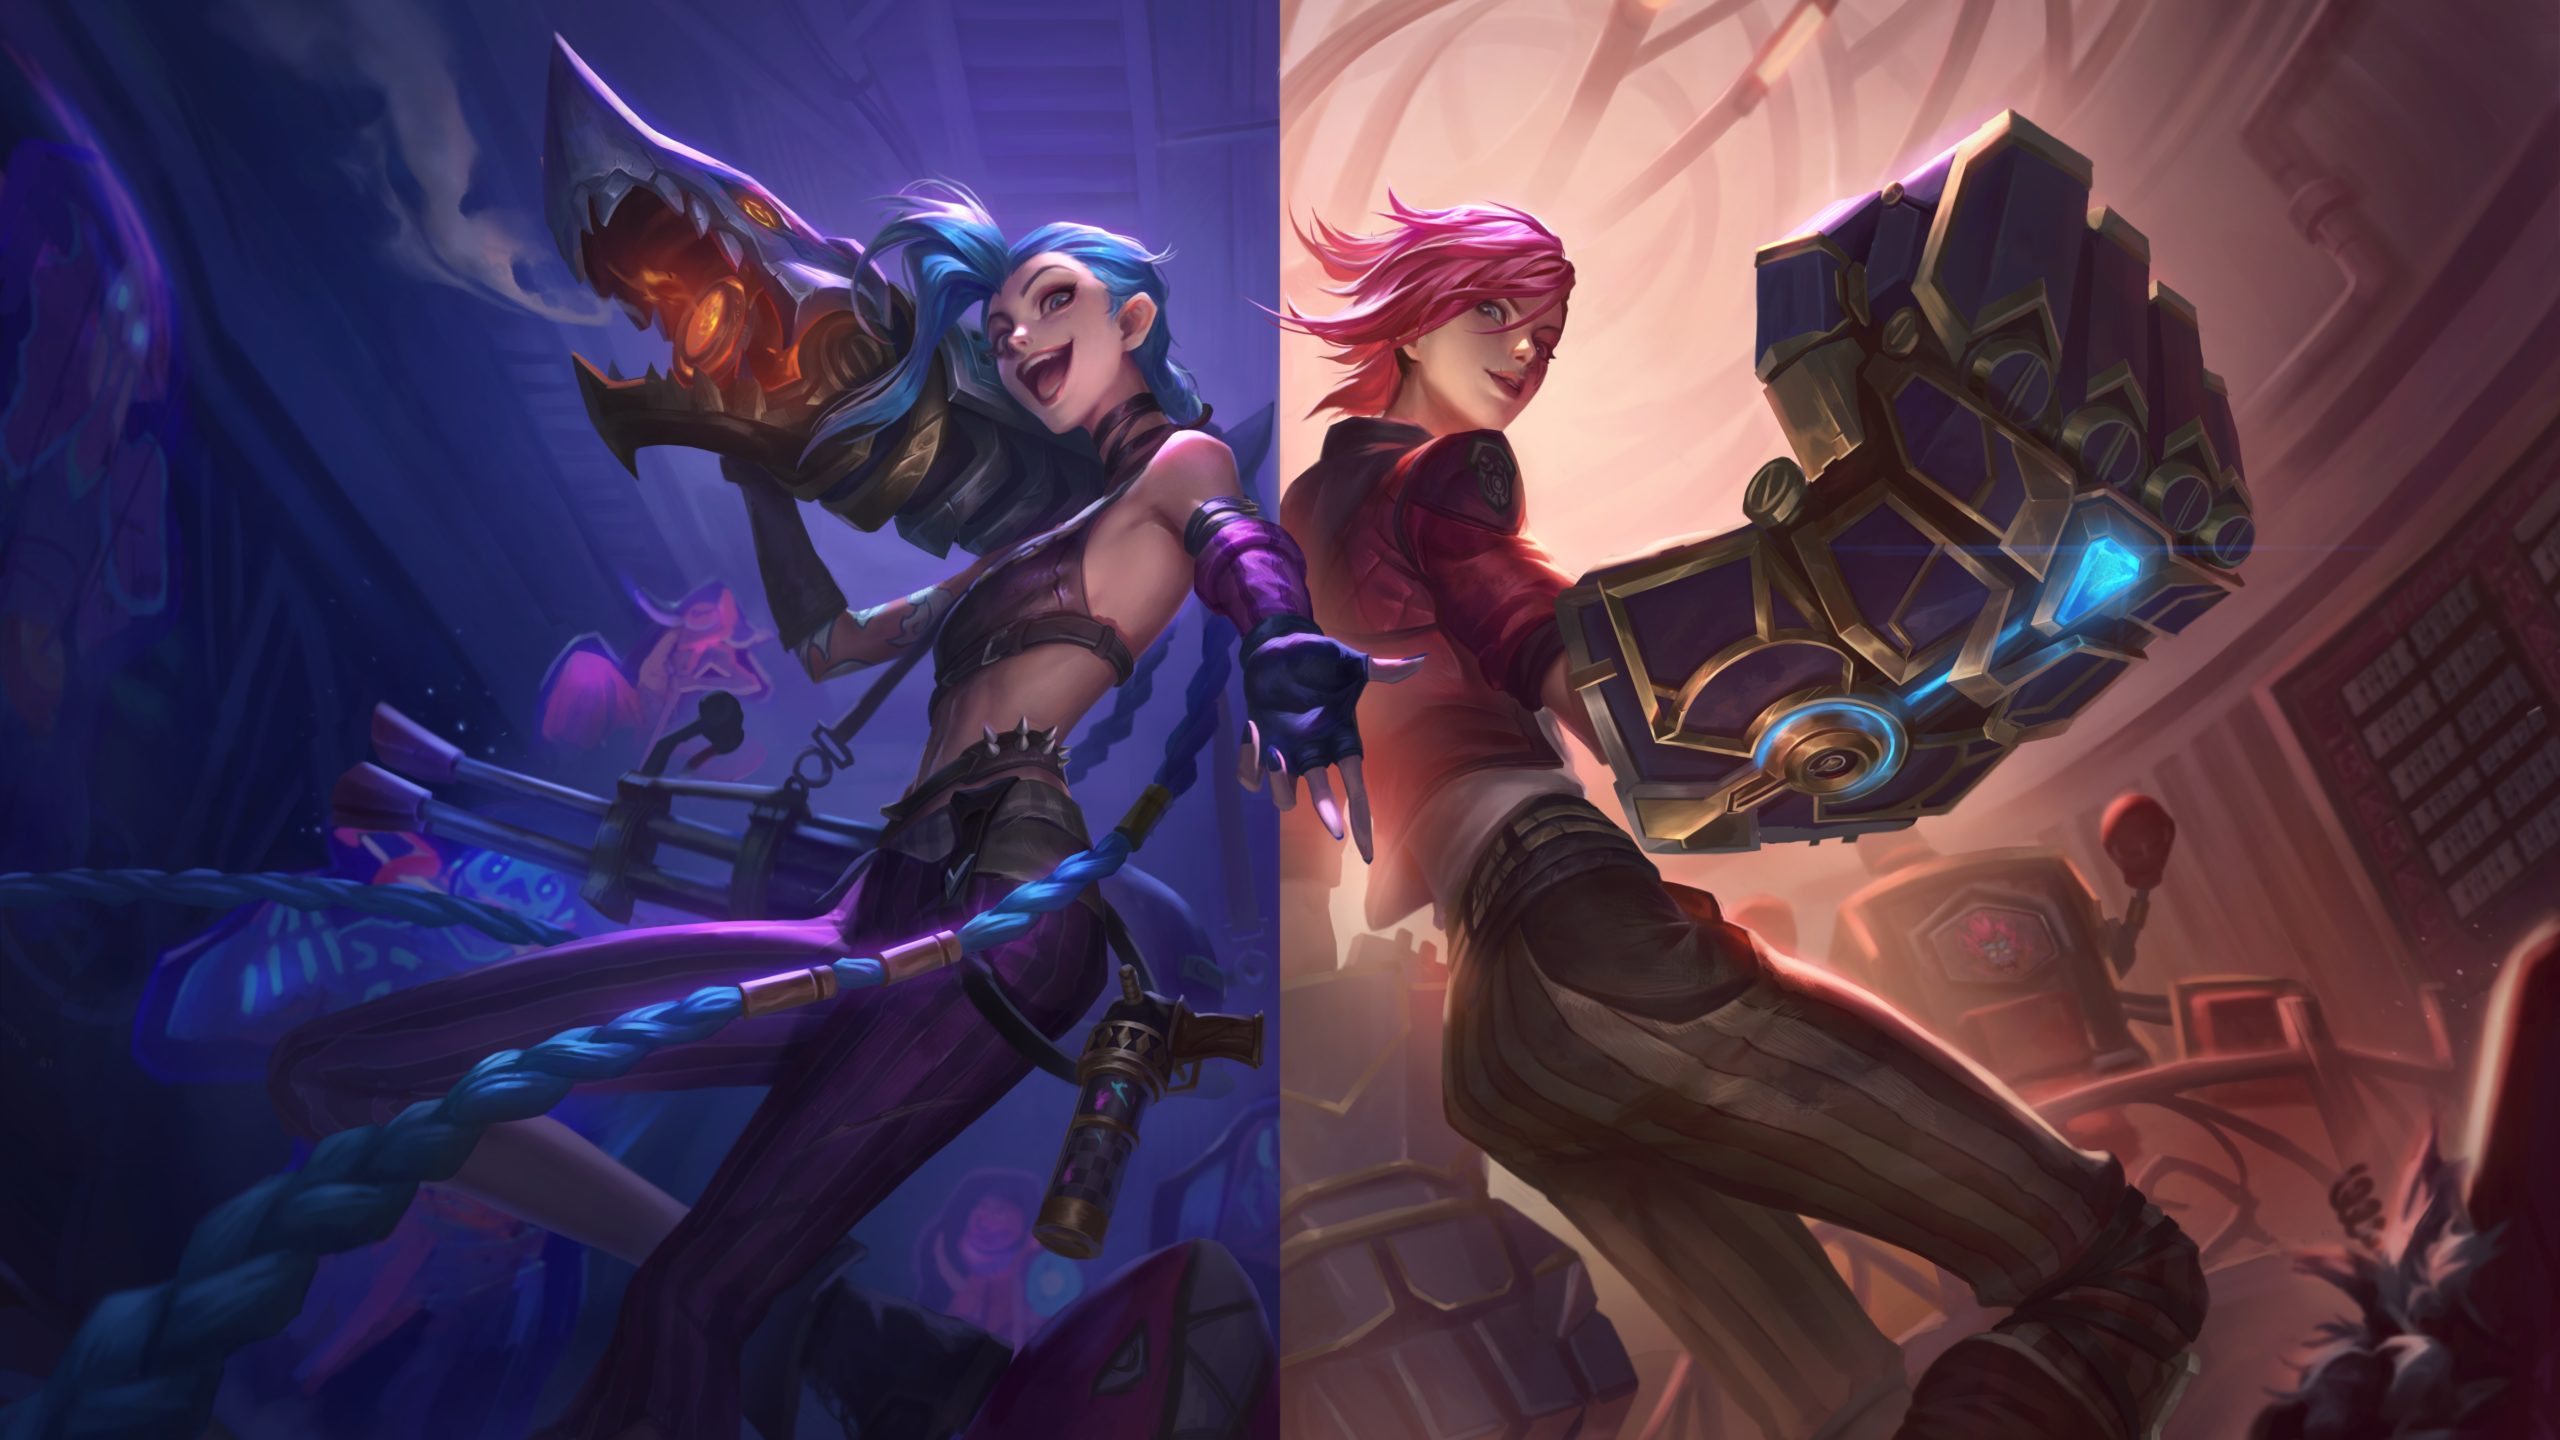 How to get Arcane Jinx and Vi skins in Wild Rift